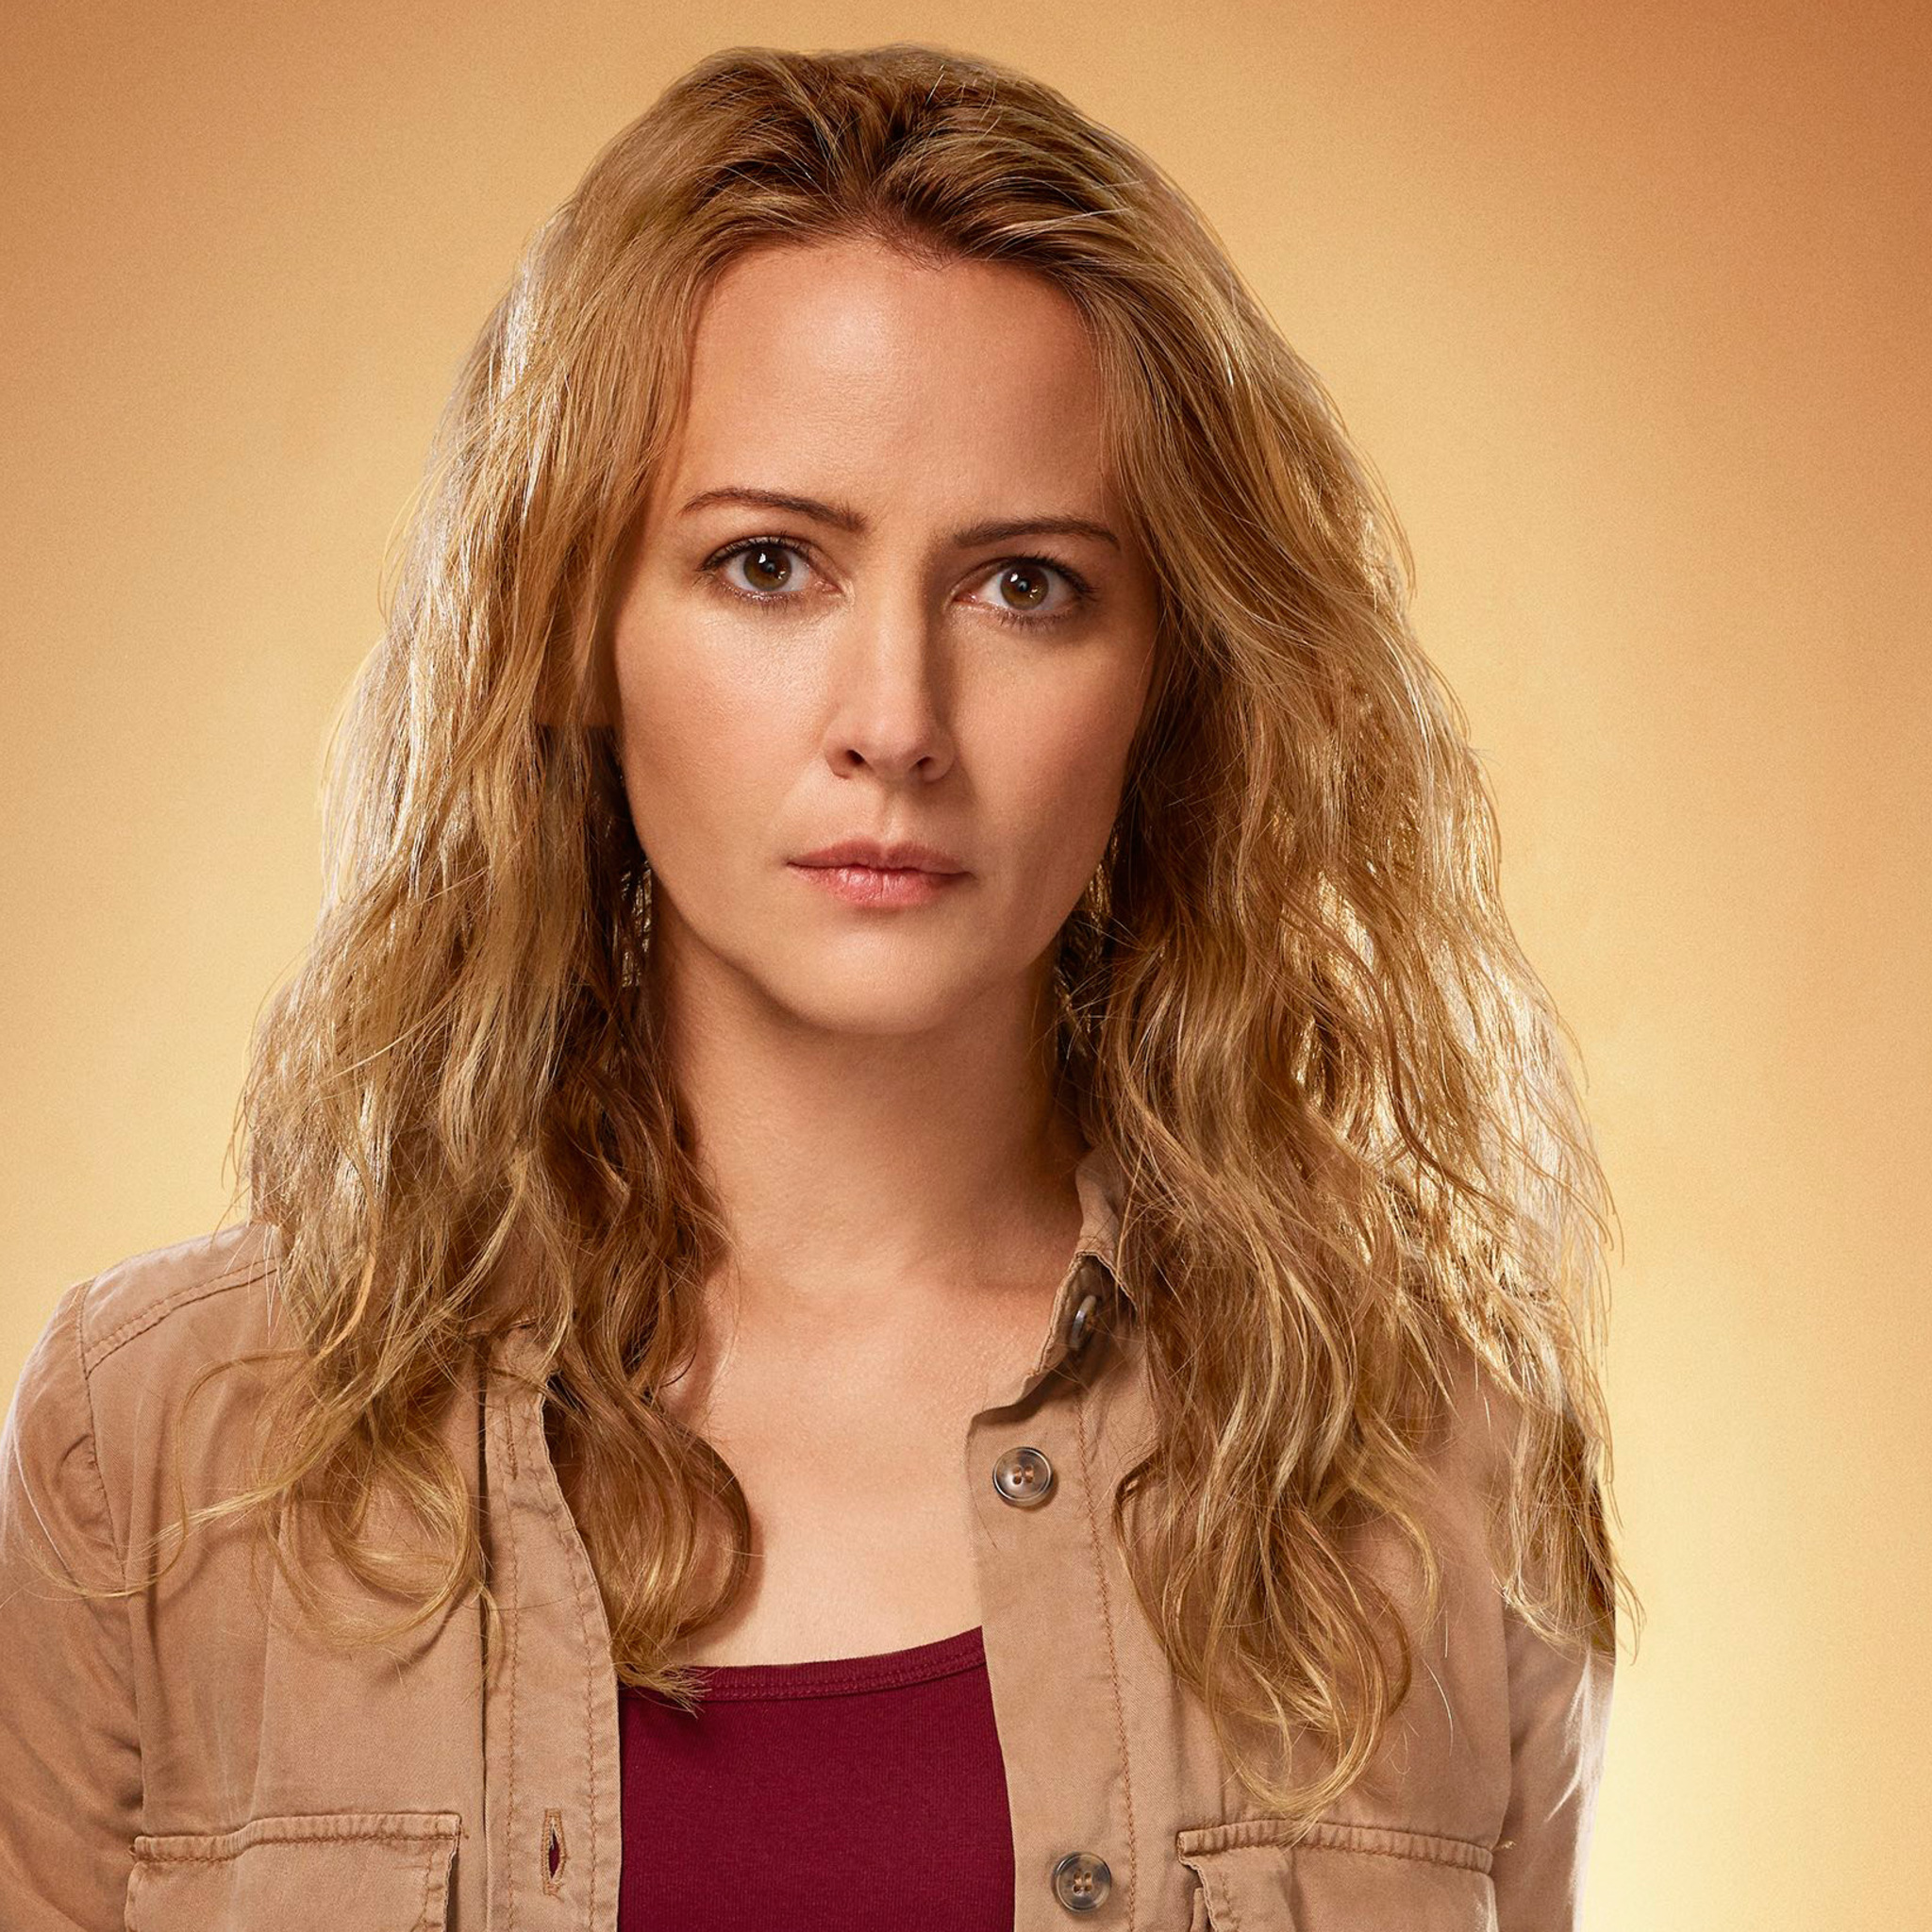 Amy Acker As Caitlin Strucker In The Gifted Season 2 In 2048x2048 Resolutio...